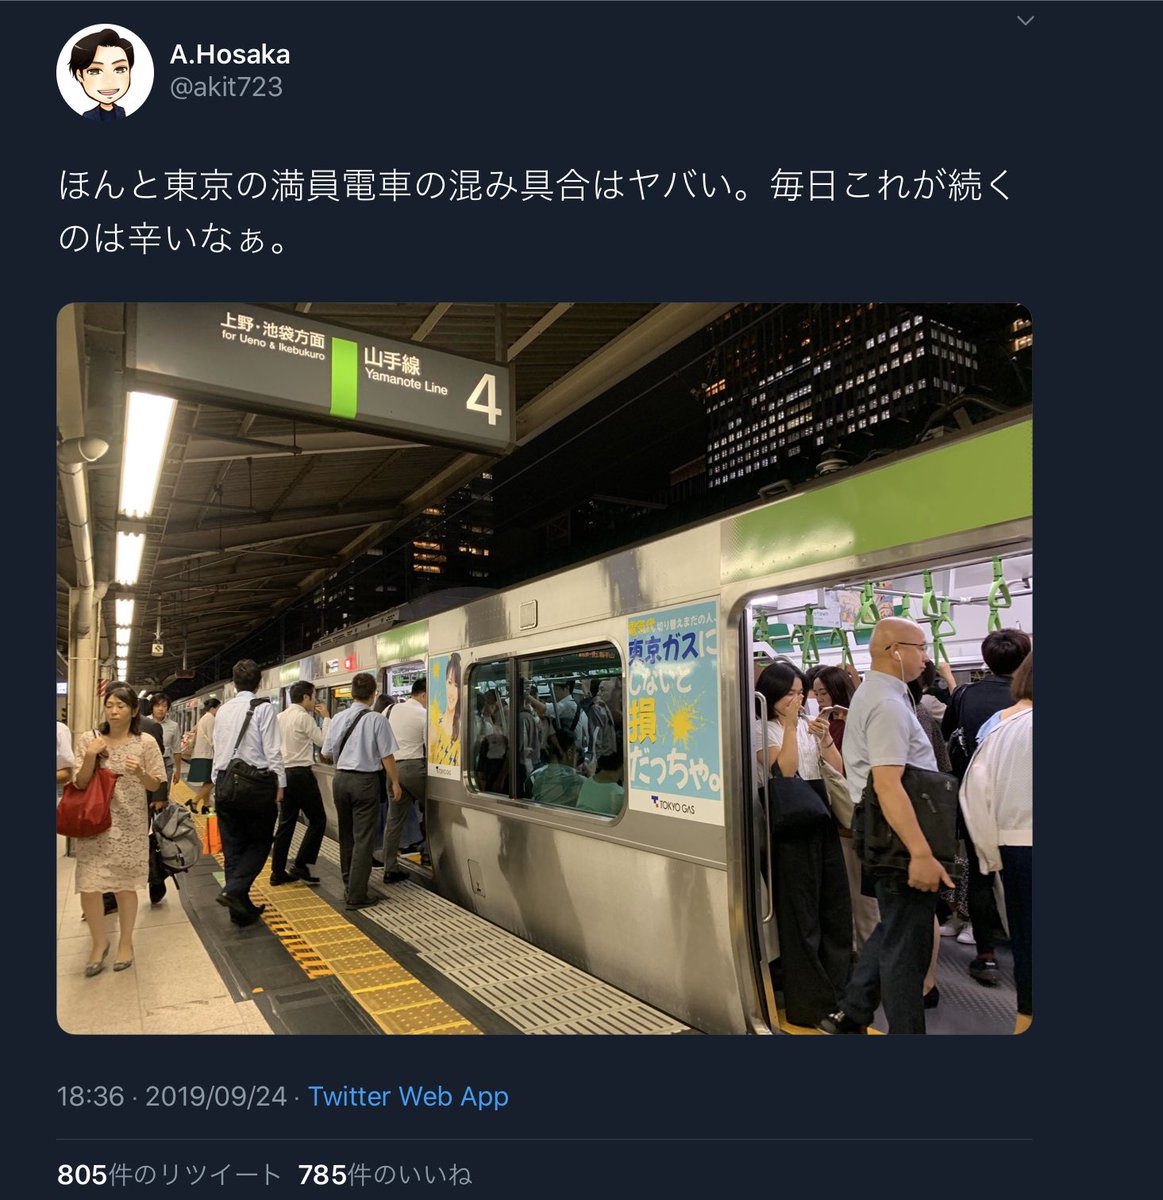 [Image] I'm crazy because I'm not a Sapporo citizen who thinks this is a crowded train, but a Tokyo citizen who thinks it ’s a rattle…